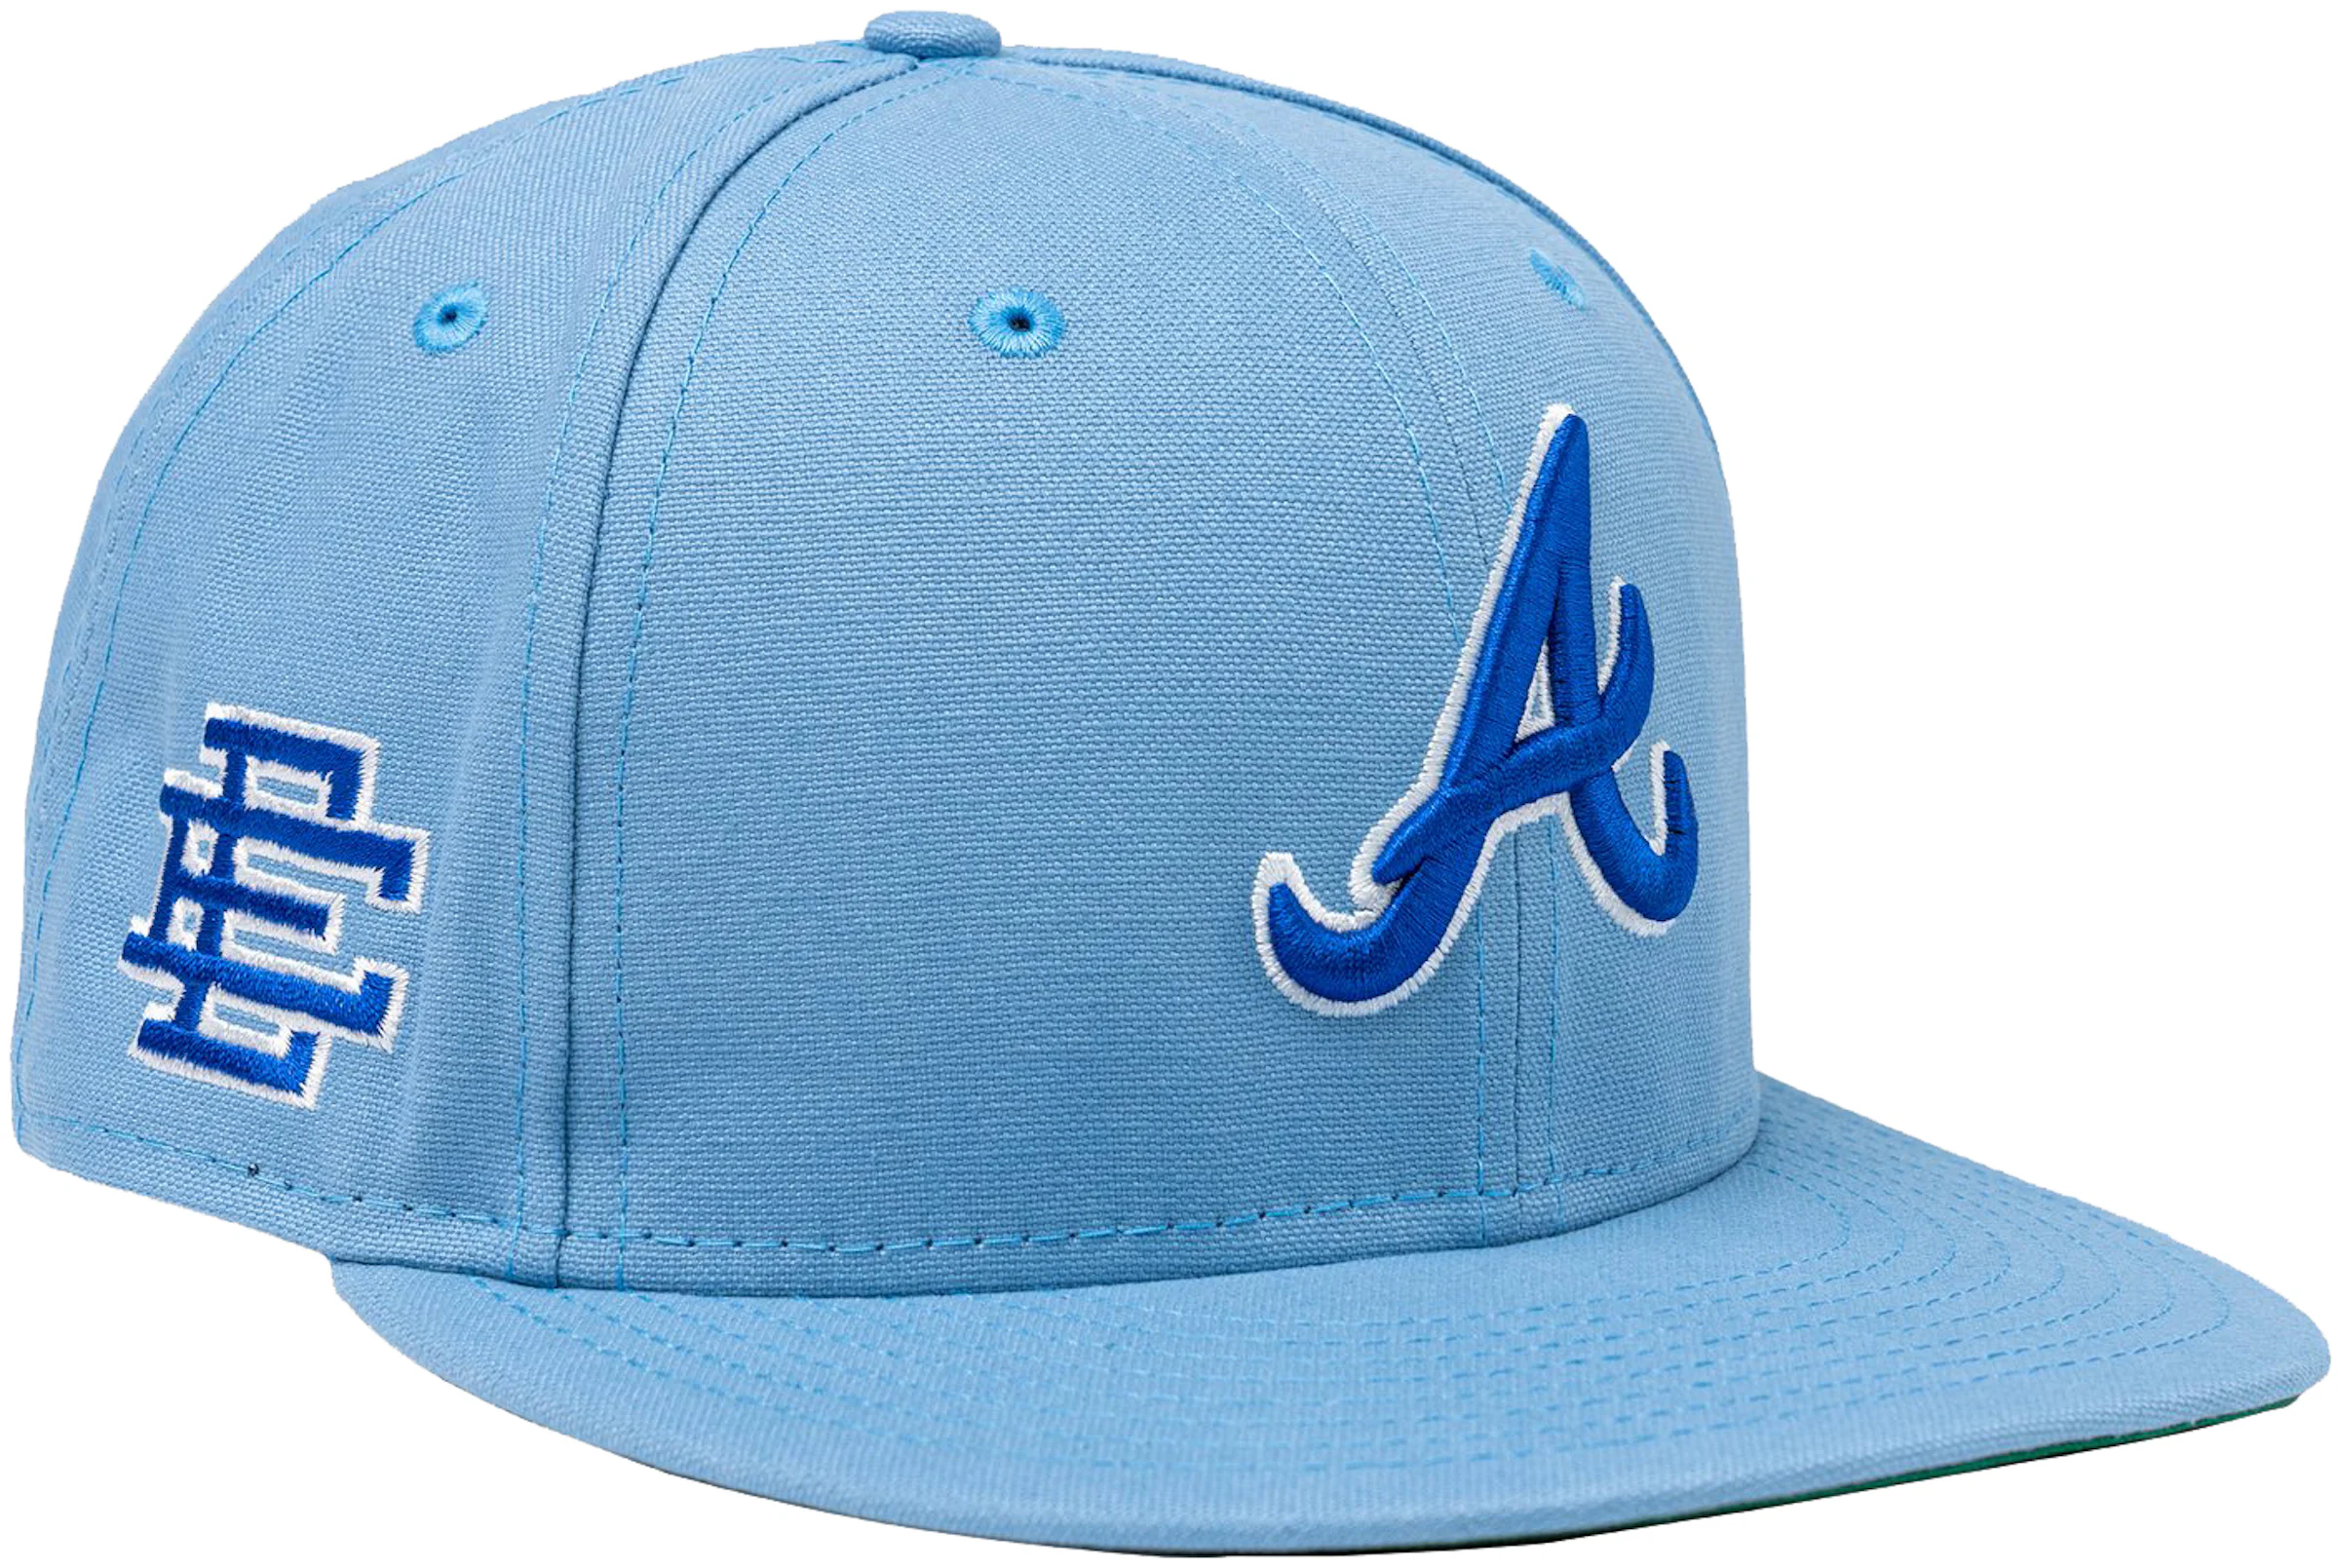 New Era Offset x Atlanta Braves 59fifty Fitted Hat Blue